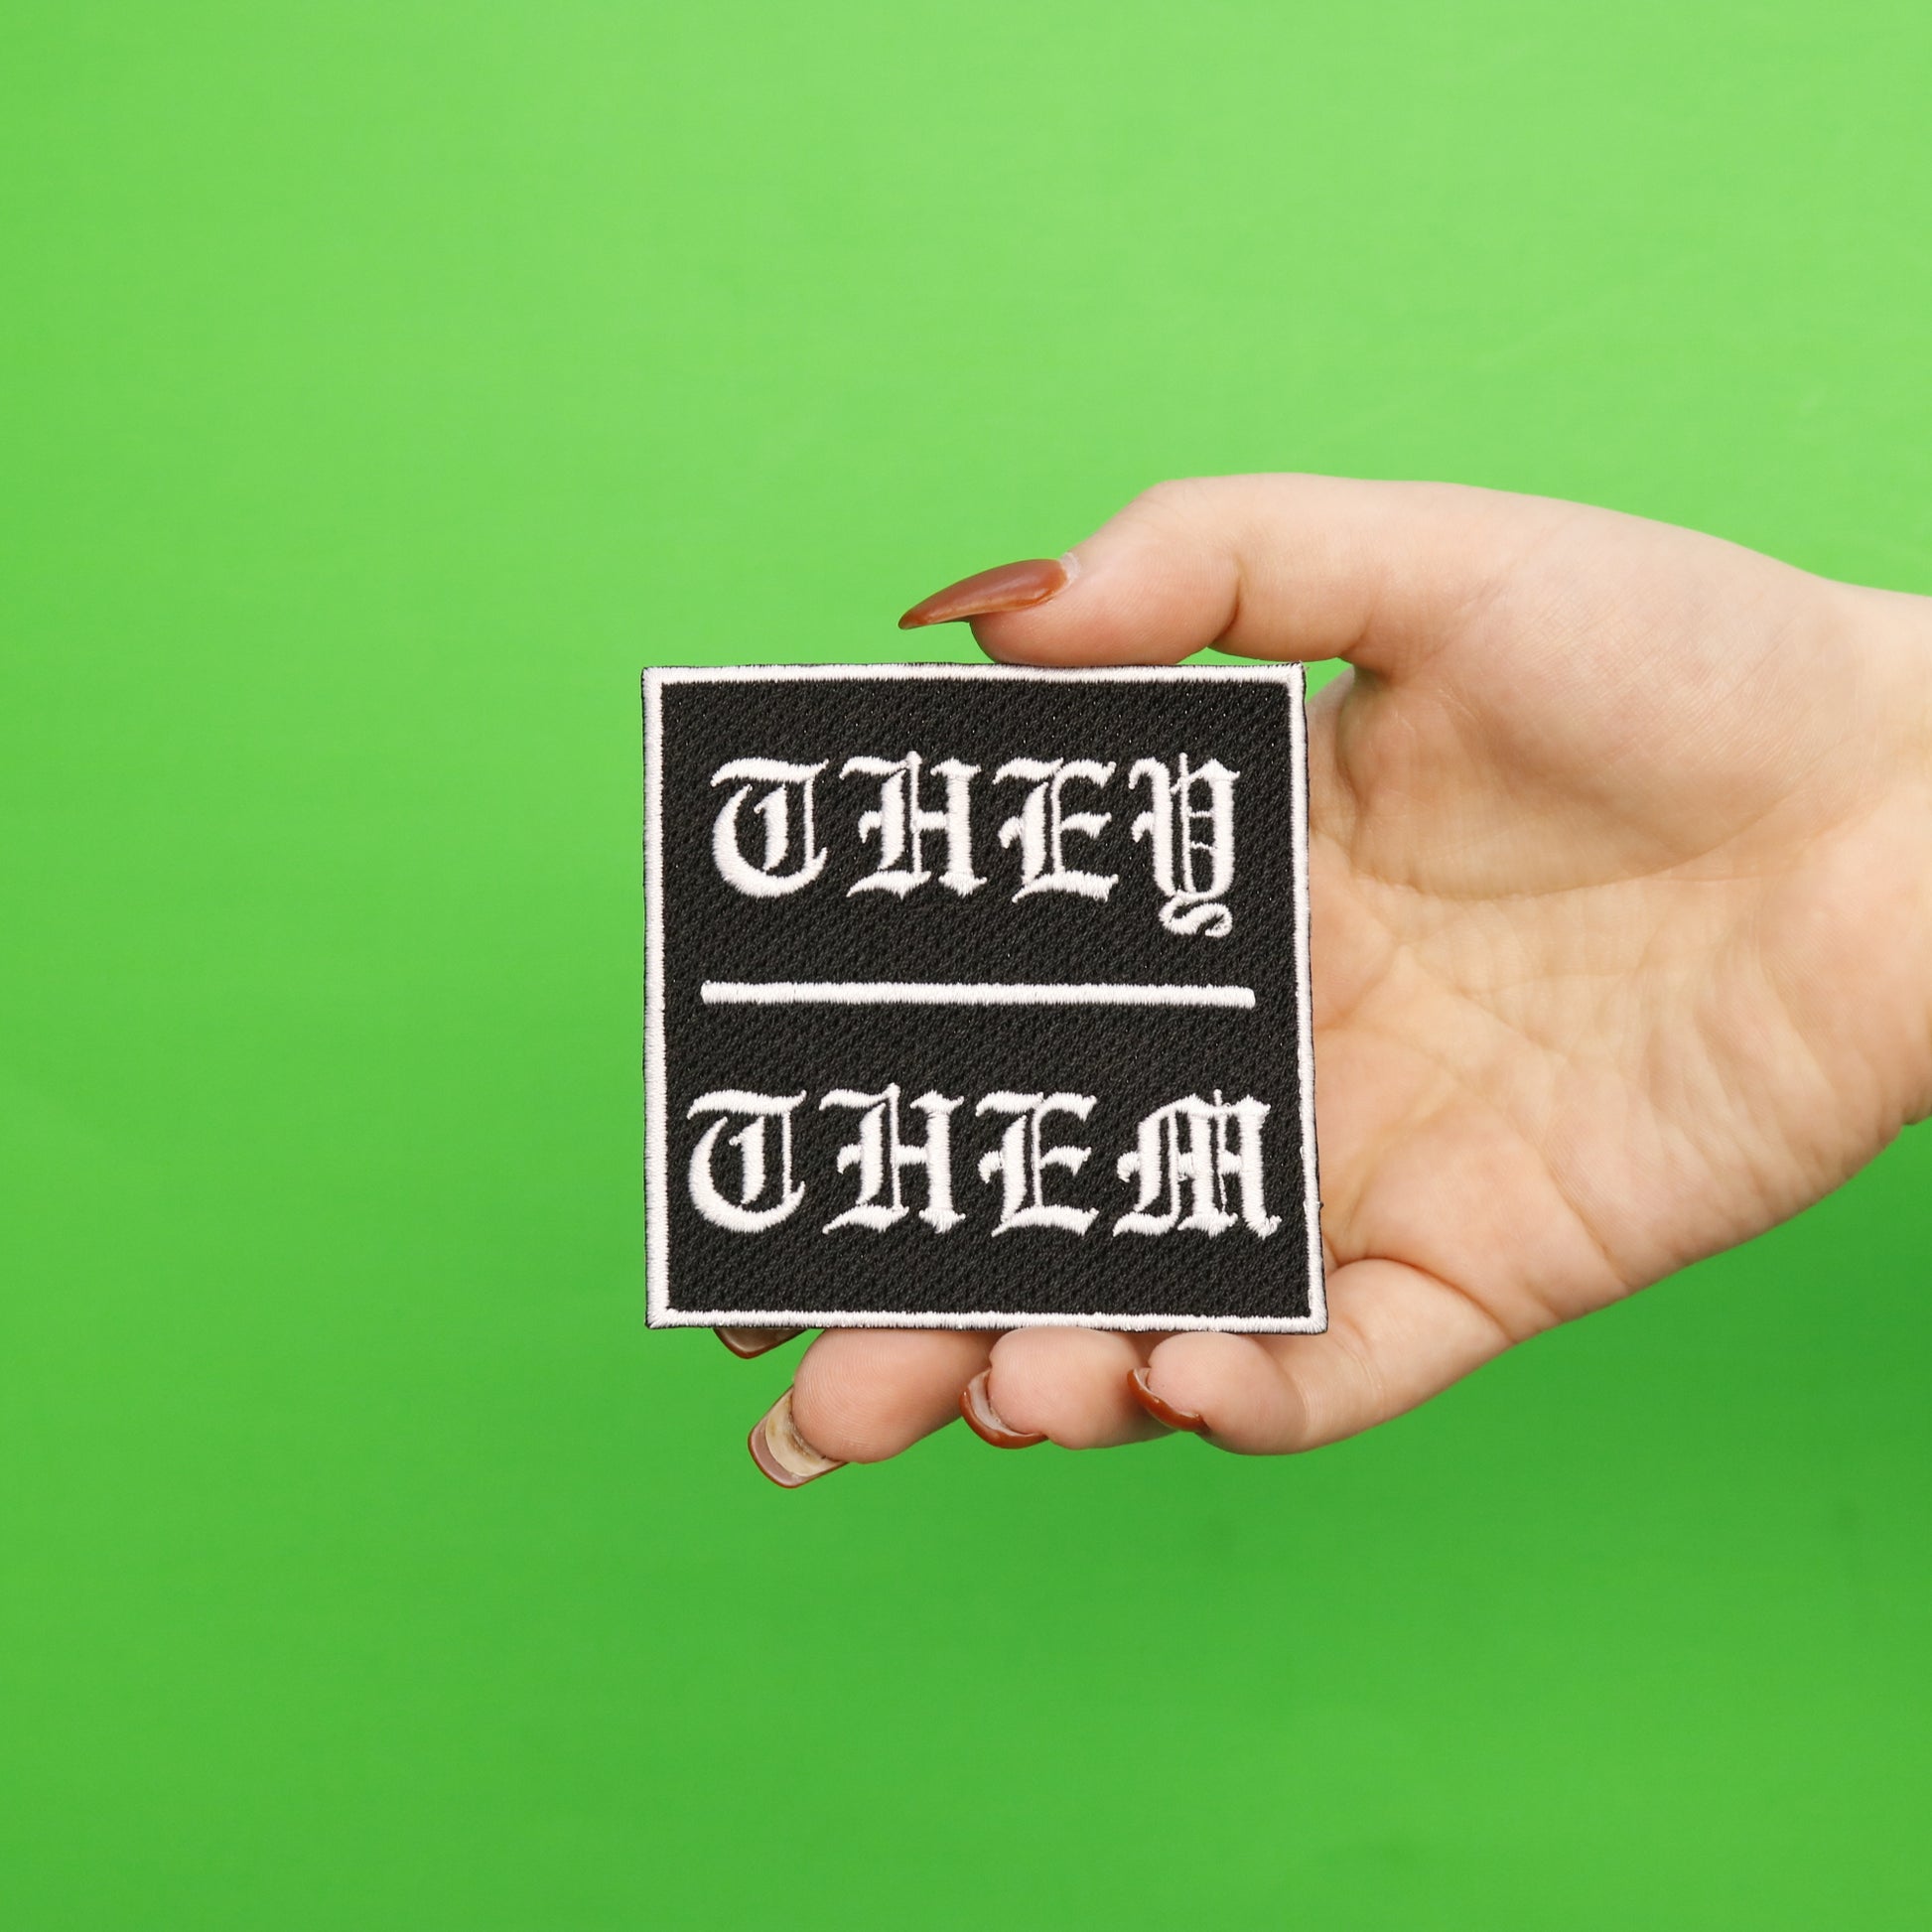 Non-Binary They/Them Pronouns Embroidered Iron On Patch 